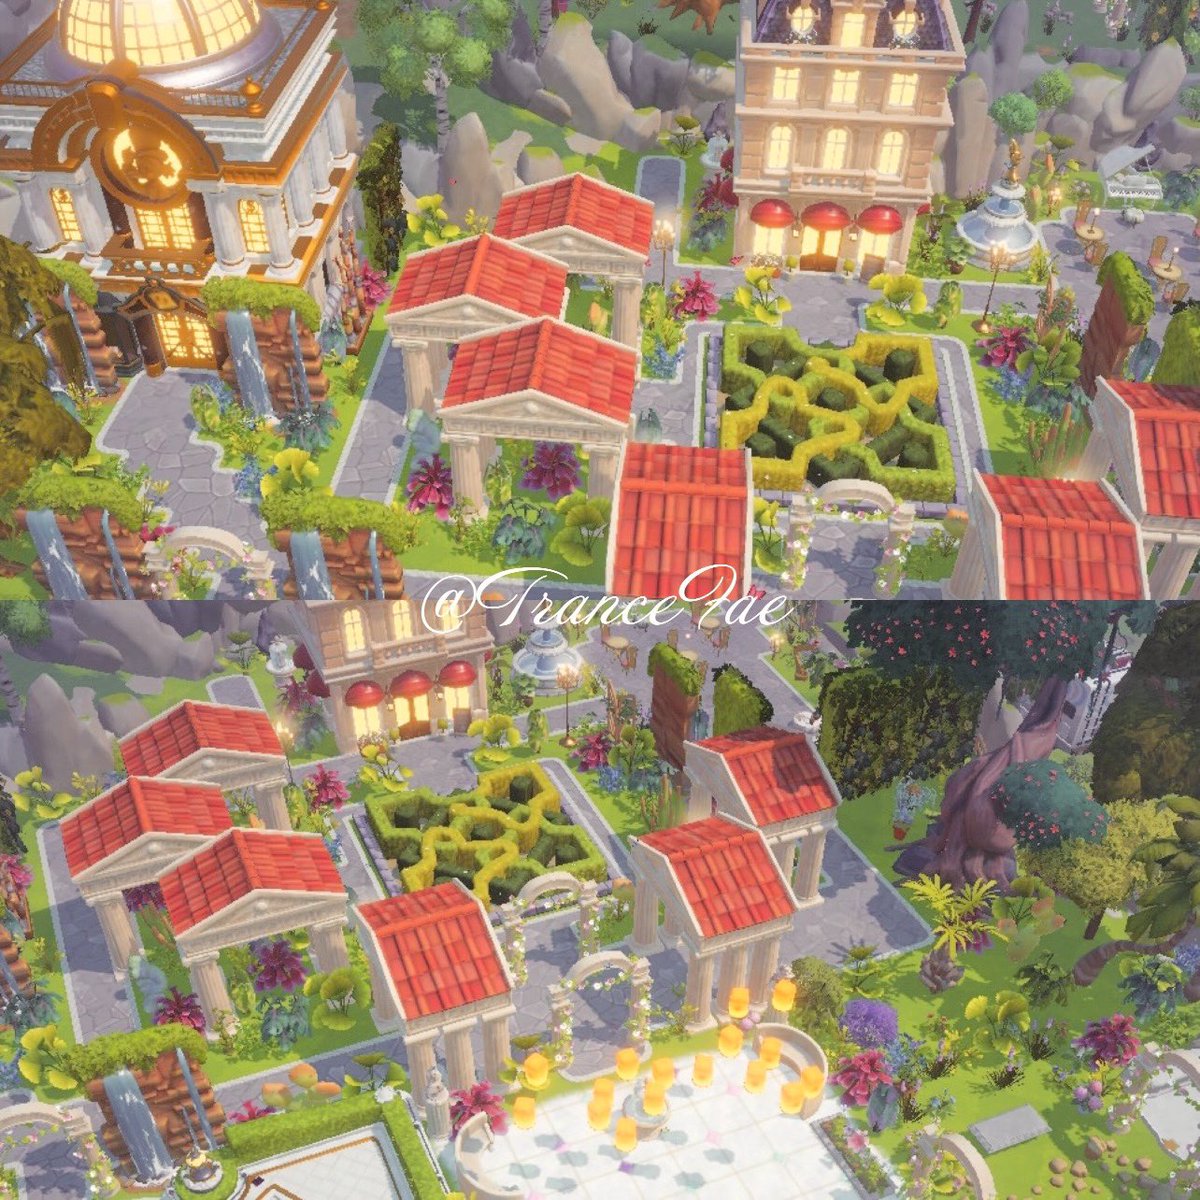 Here’s one side of my new plaza design - featuring a diagonal jungle footpath to Scrooge’s, a courtyard around the topiary hedge, and Remi’s restaurant with an outdoor dining area. Truly love how the Hercules items give the space a majestic feel ❤️ #DisneyDreamlightValley